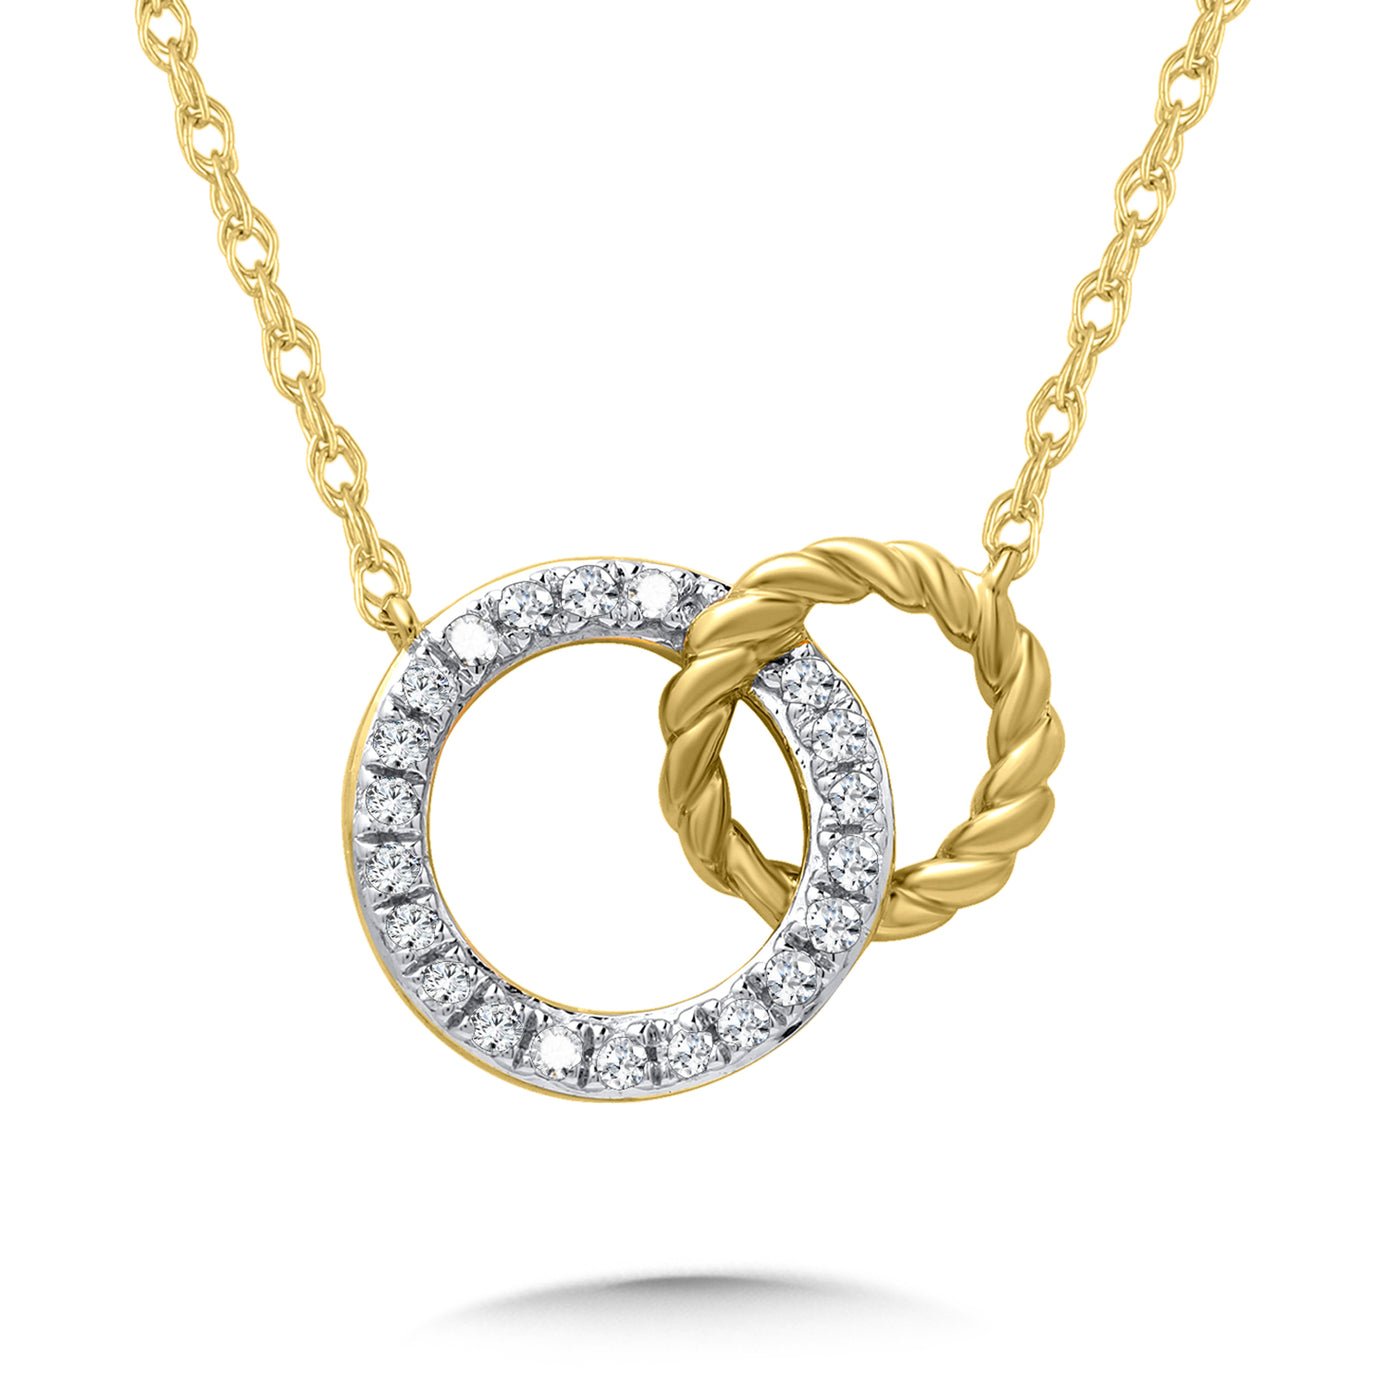 Buy Gold-Toned Necklaces & Pendants for Women by Vendsy Online | Ajio.com